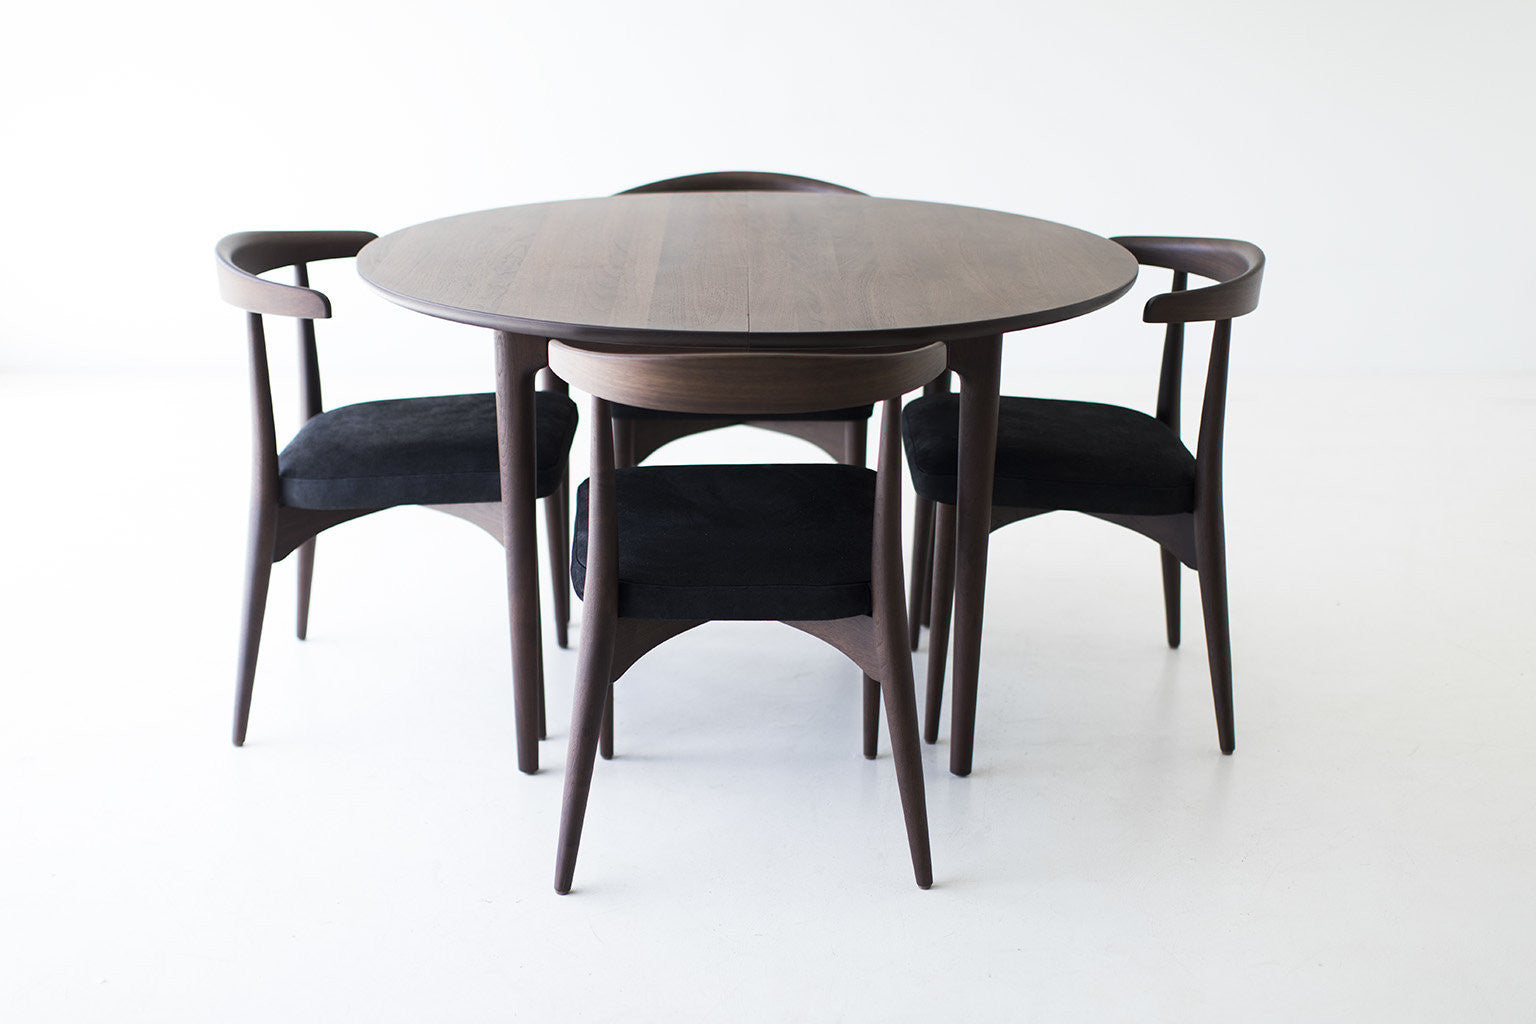 Lawrence-Peabody-Dining-Table-P-1707-Craft-Associates-Furniture-02